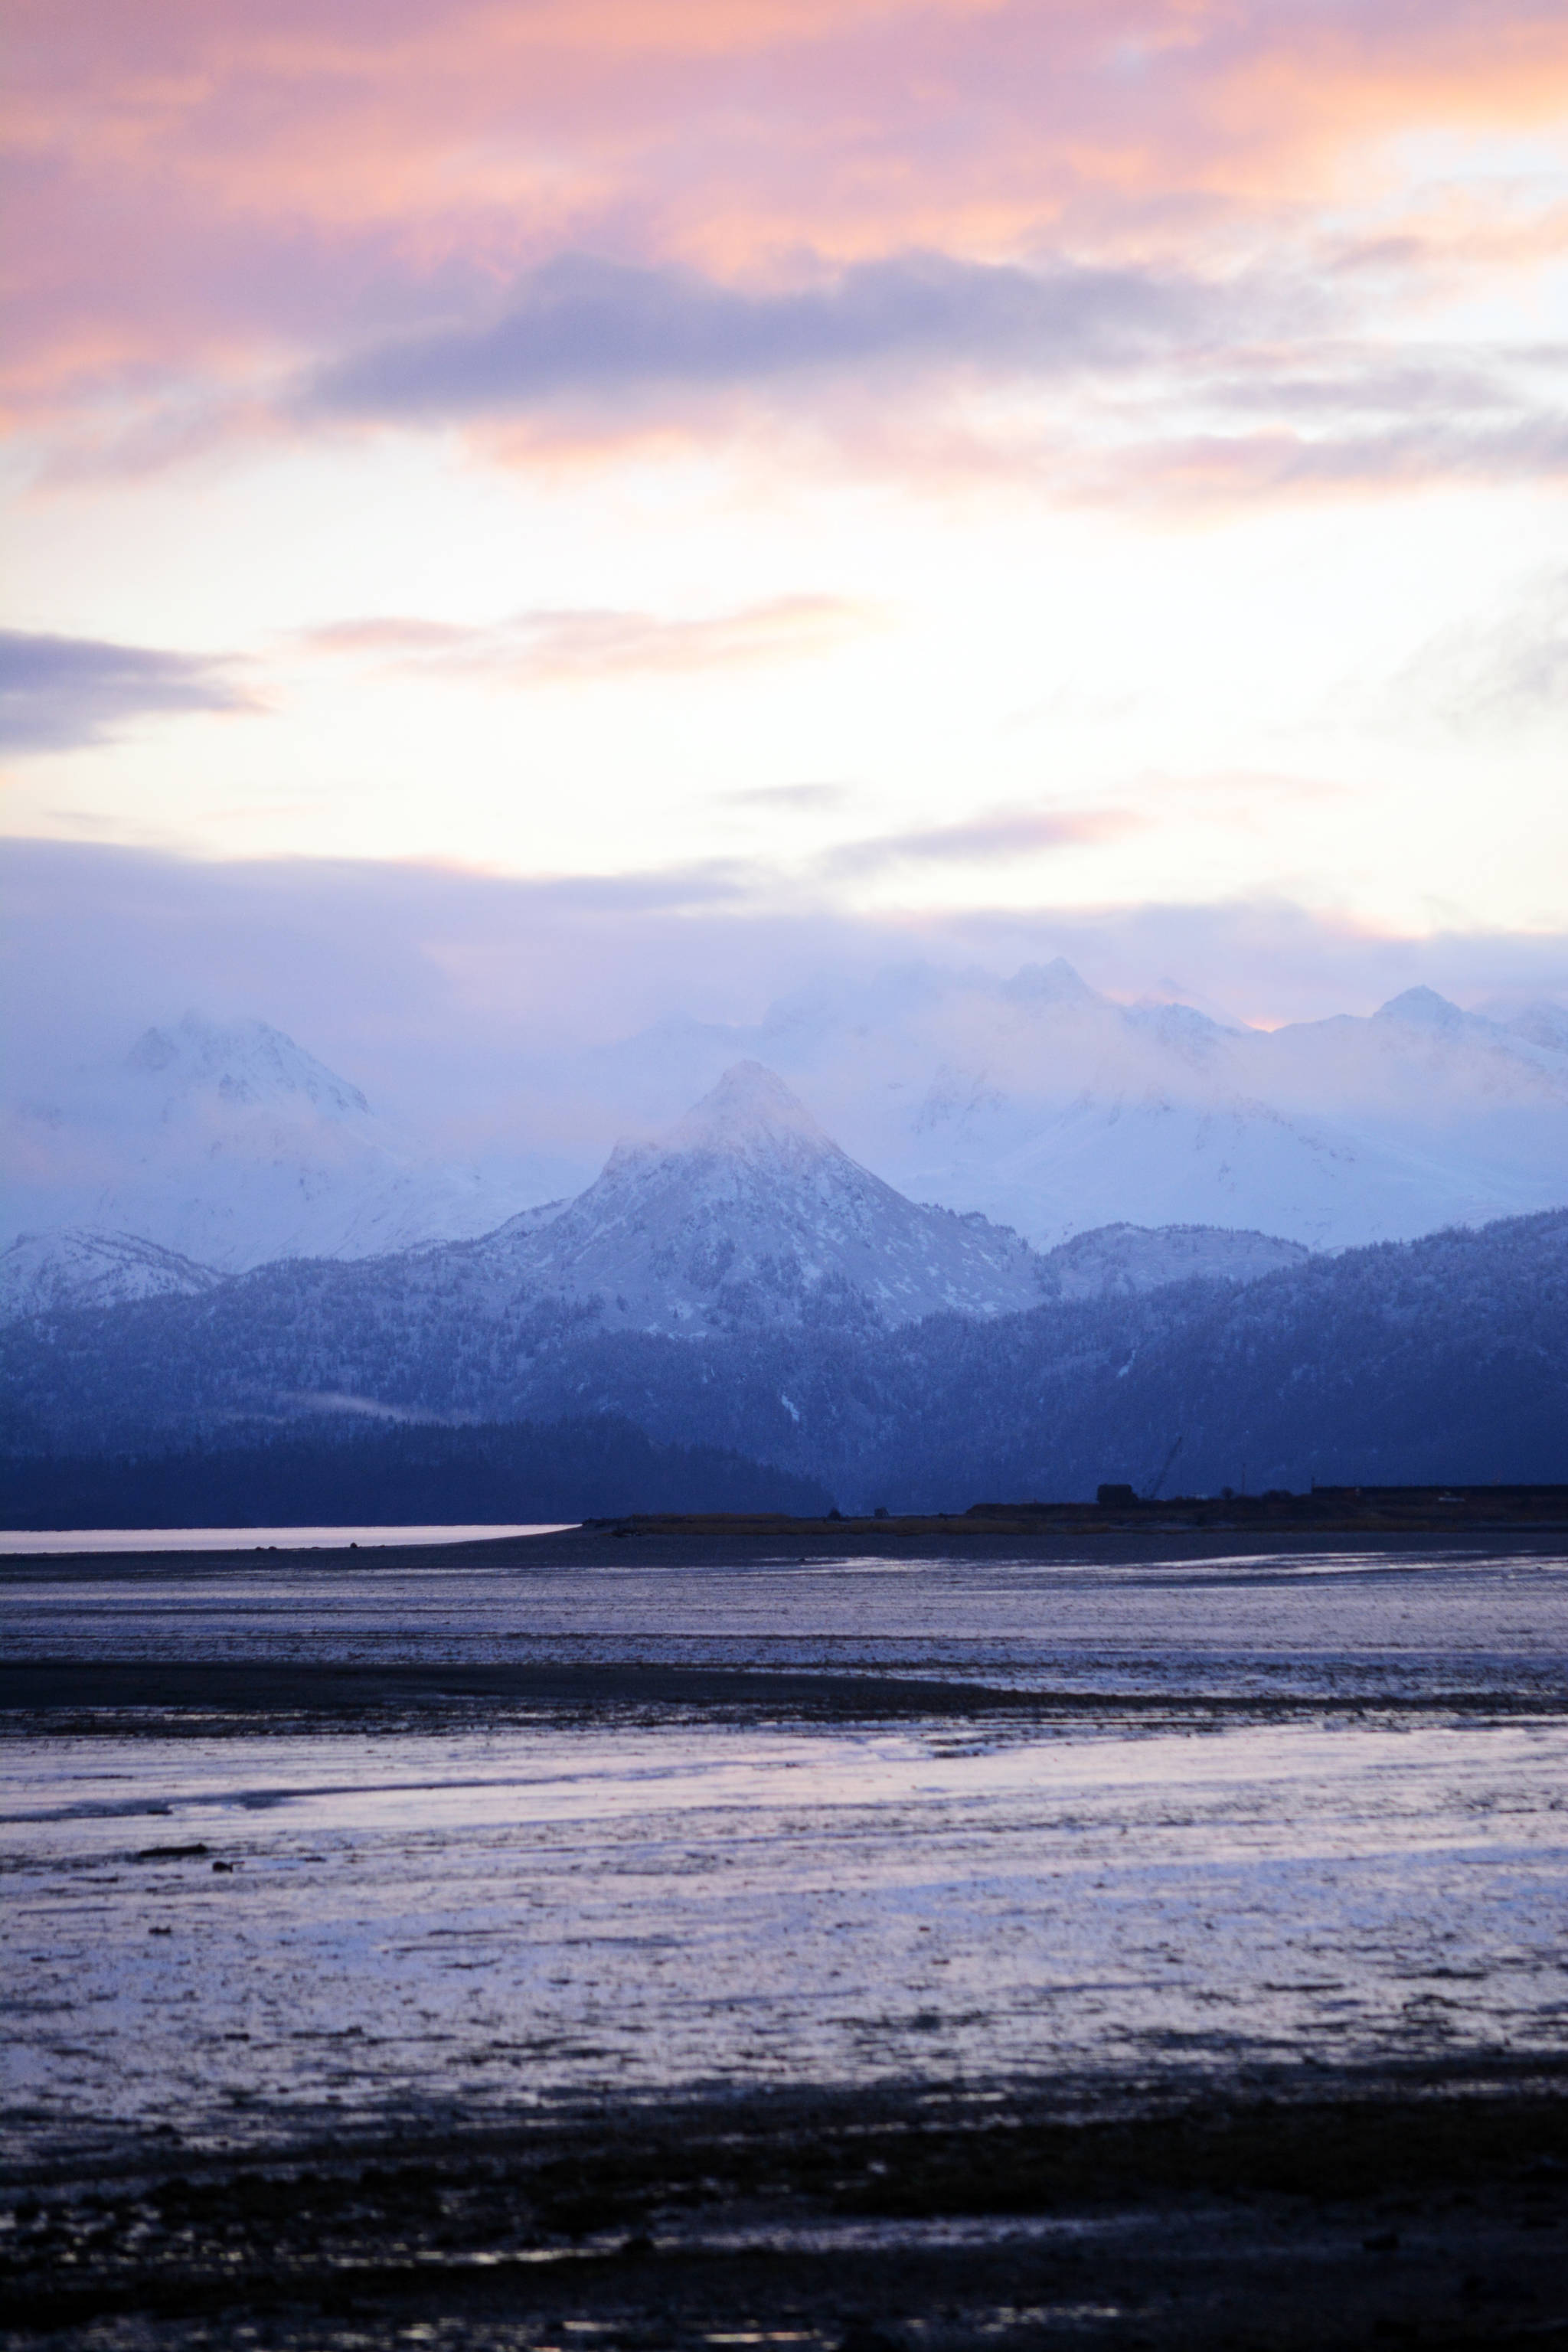 The sun rises over the Homer Spit and the Kenai Mountains on Wednesday, Jan. 3, 2018. On Thursday there will be 6 hours and 17 minutes of daylight, a gain of 13 minutes from last week. (Photo by Michael Armstrong/Homer News)